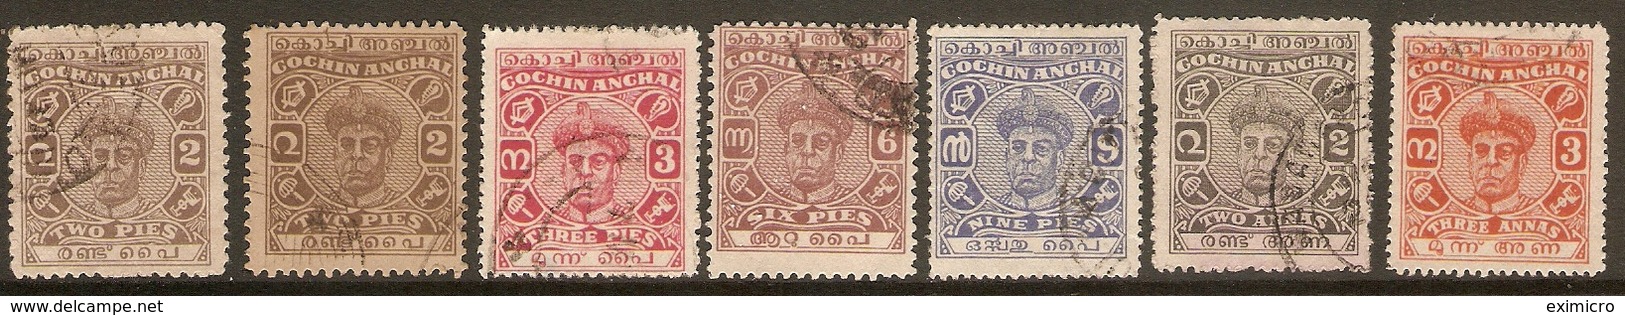 INDIA - COCHIN 1946 - 1948 ALL DIFFERENT TO TOP VALUES BETWEEN SG 101 And SG 108 FINE USED Cat £26+ - Cochin